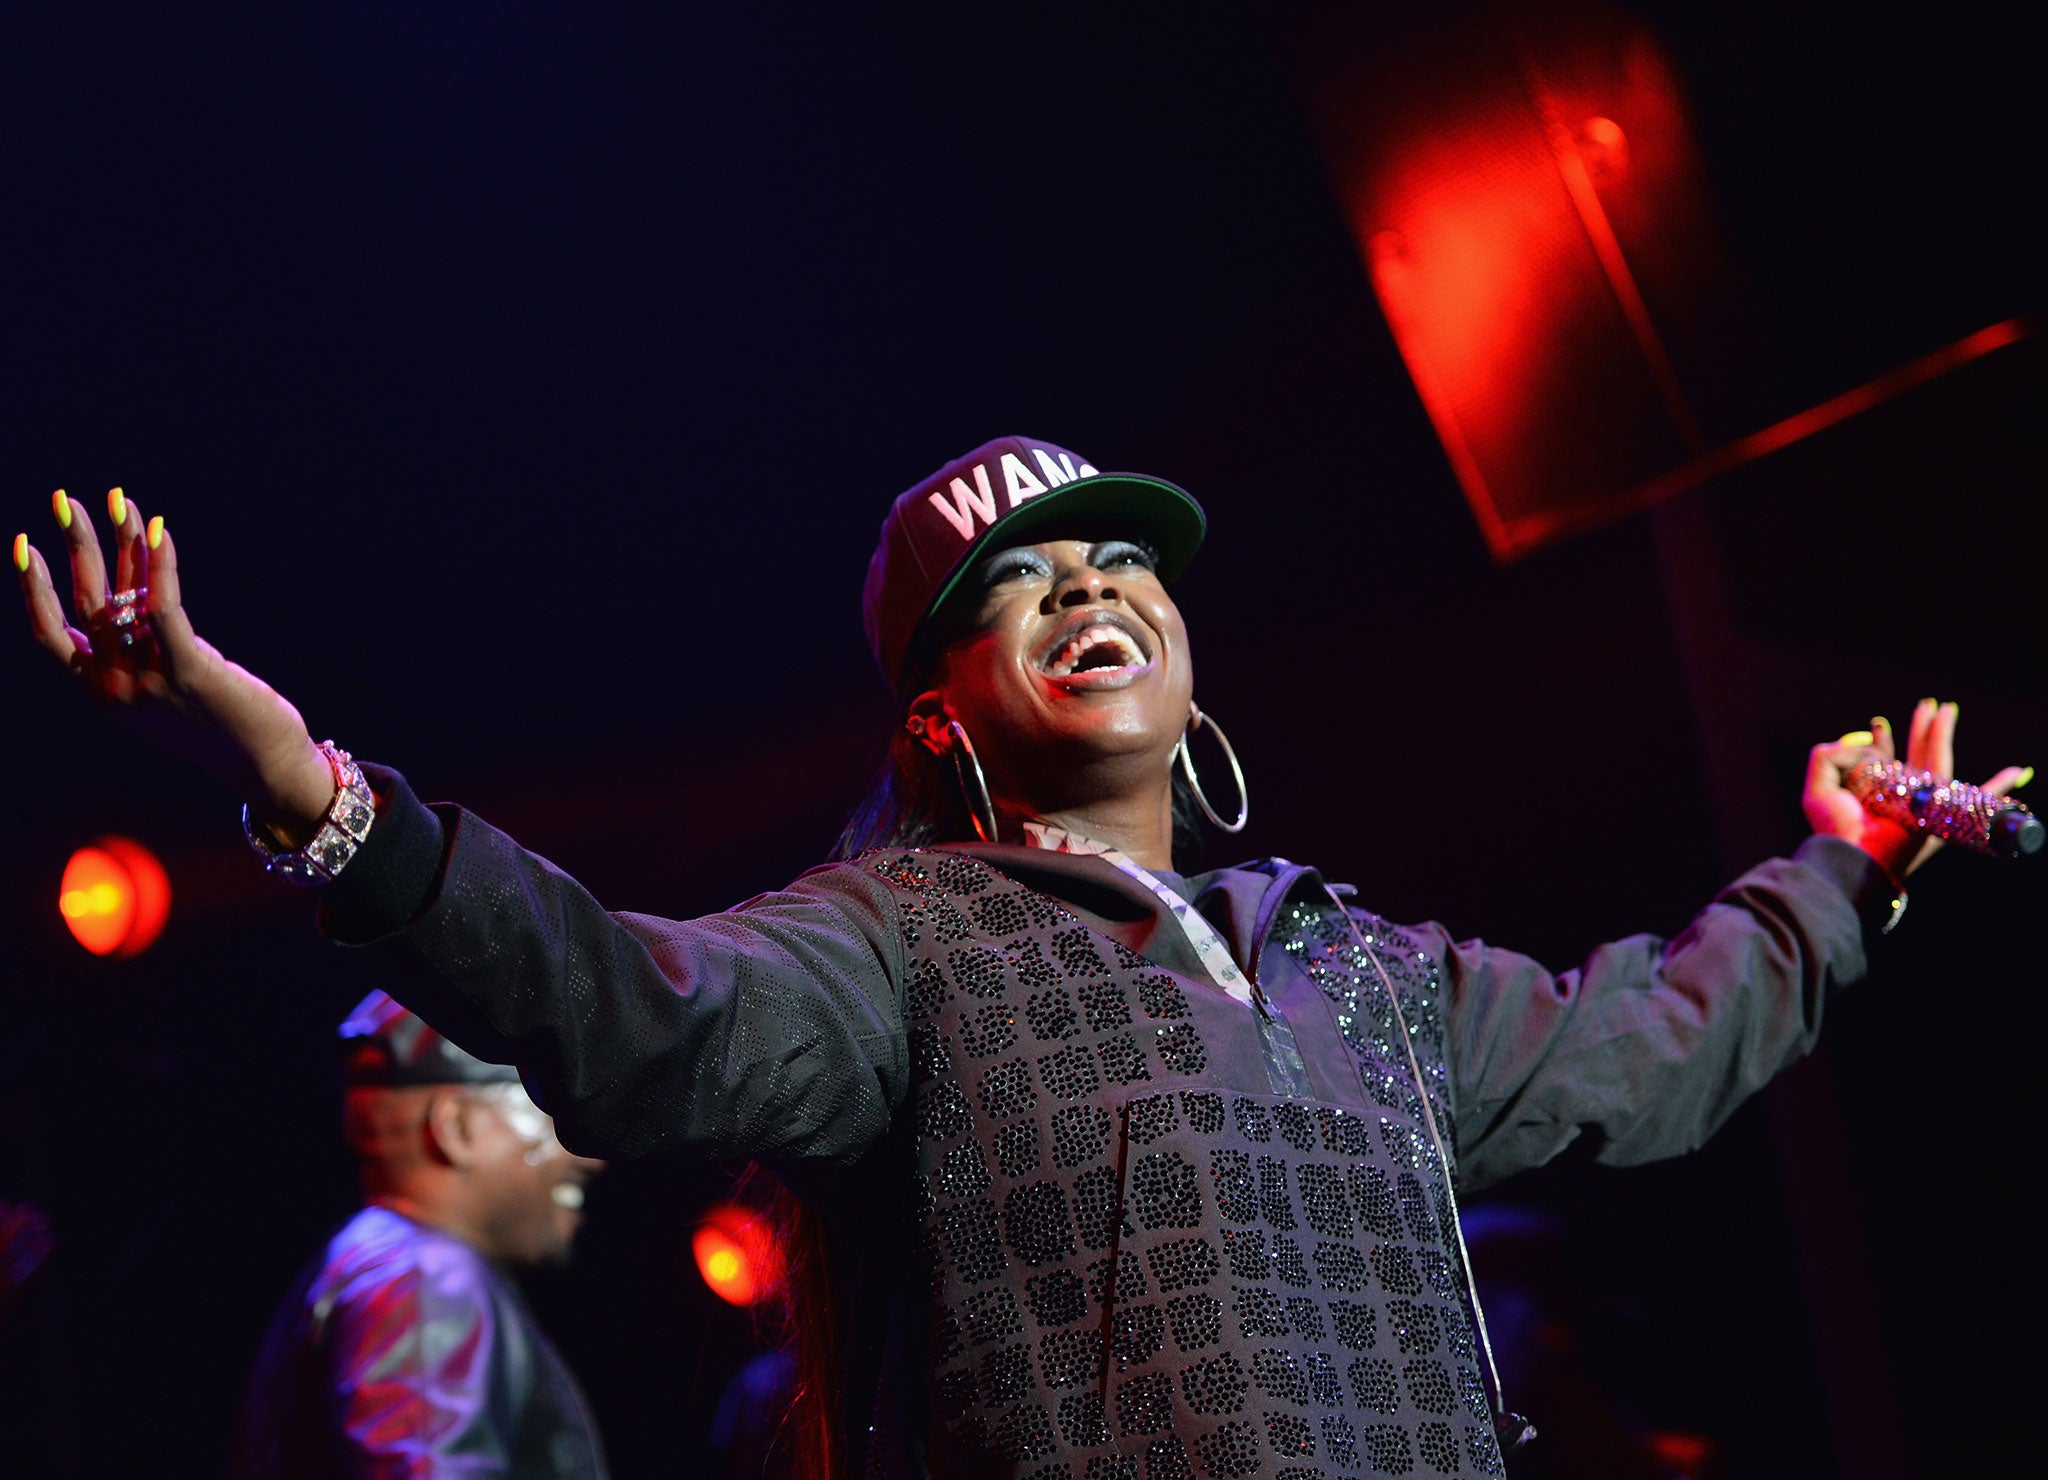 Missy Elliott has been largely absent from the music scene since her sixth album in 2005